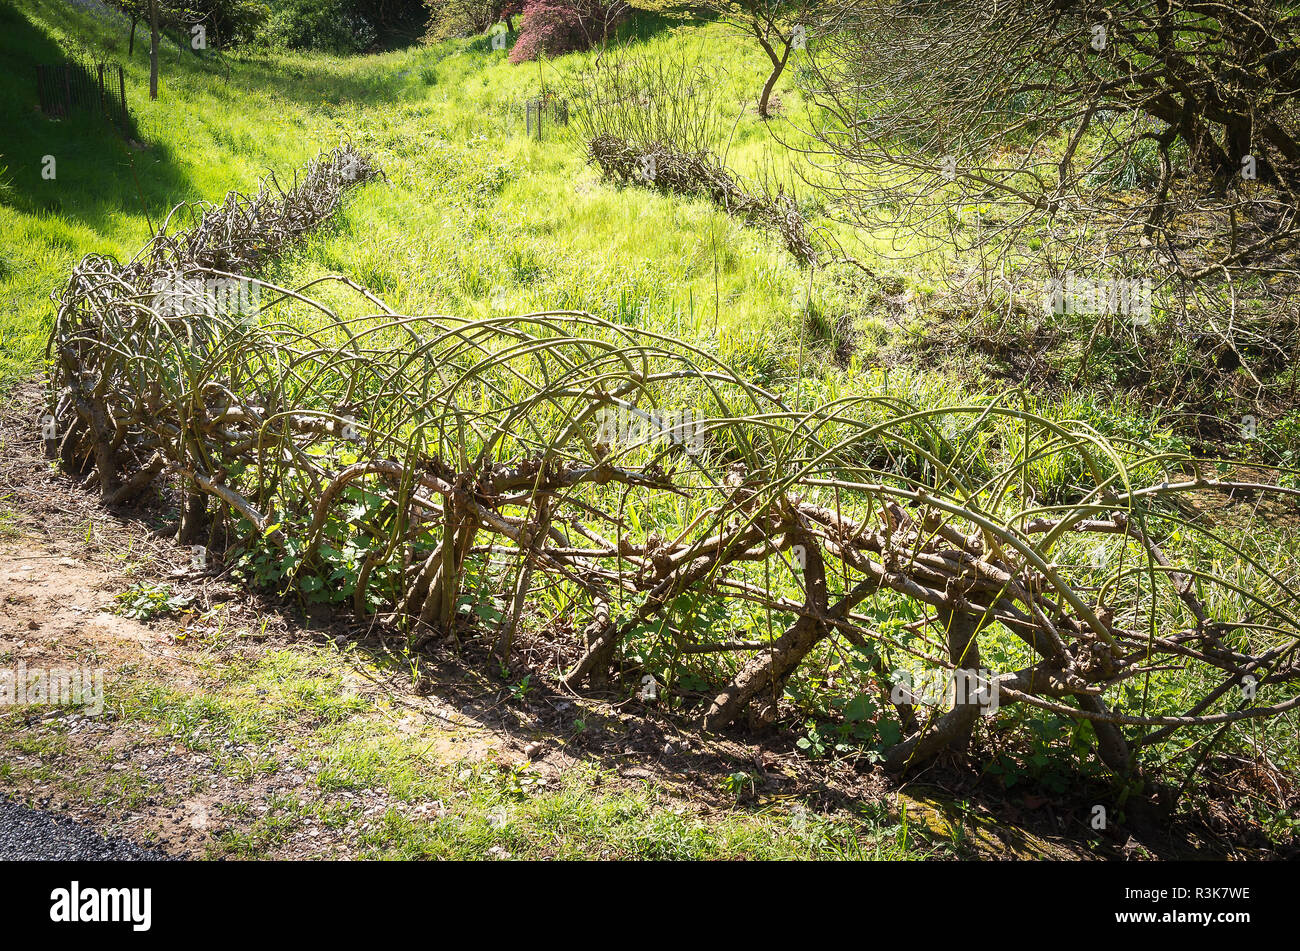 A low-growing trained willow hedge to deter visitors straying into a boggy stream area of the garden at Hilliers Arboretum in Hampshire England UK Stock Photo